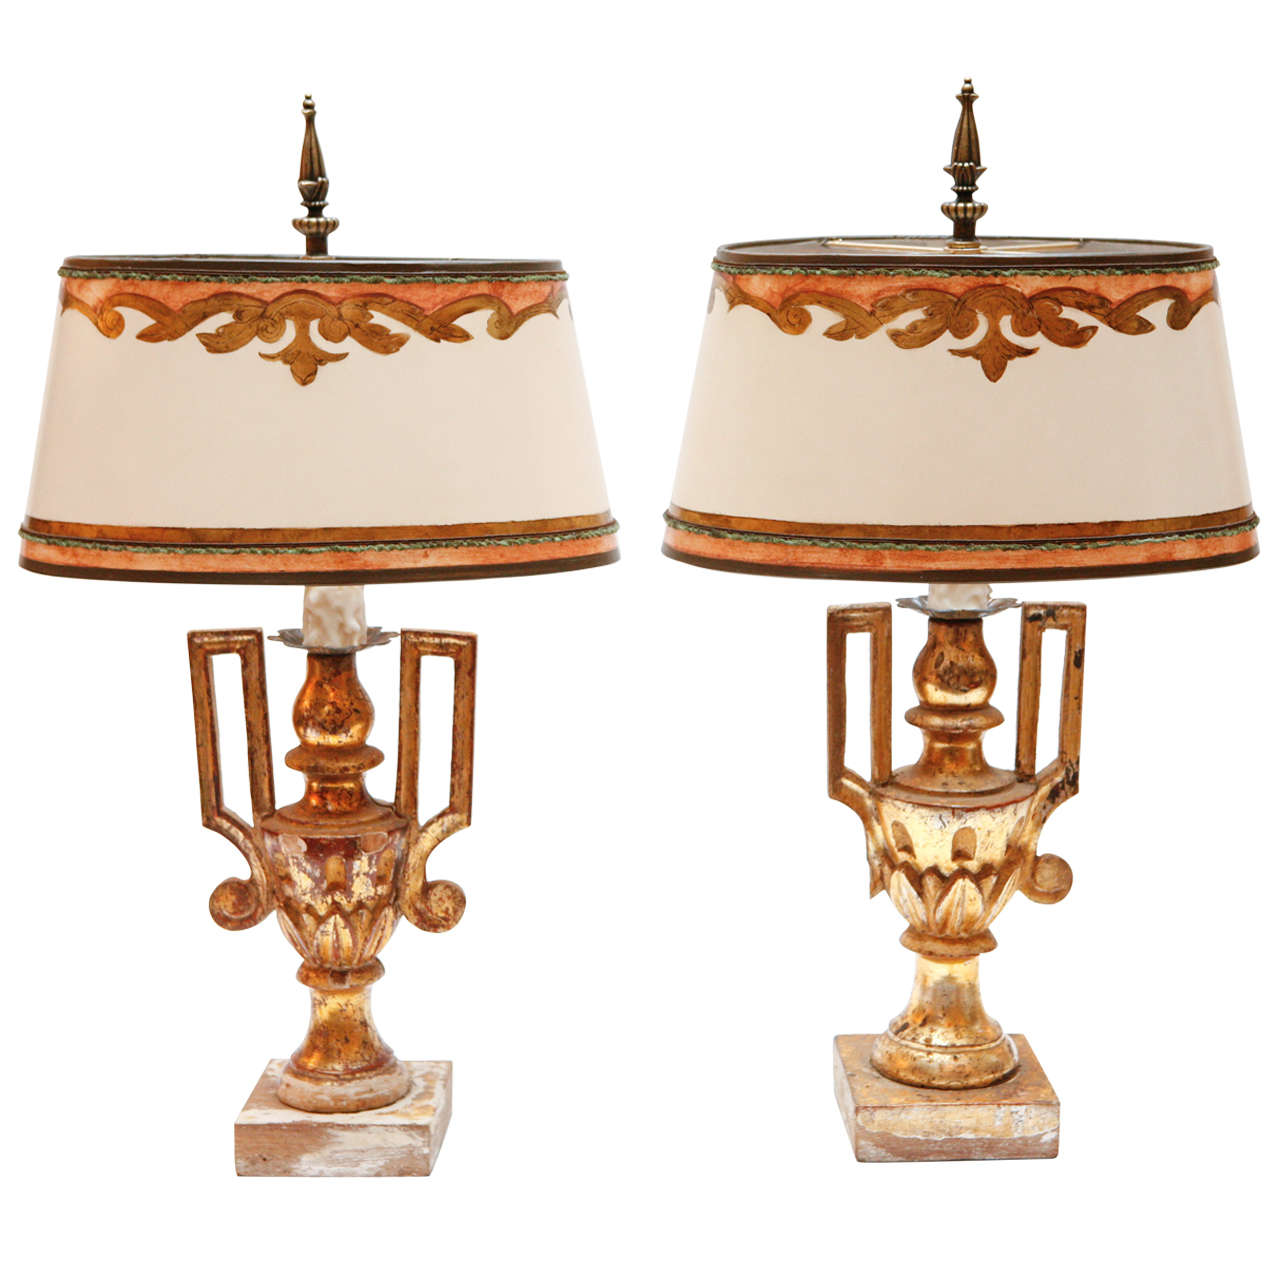 Pair of 19th c. Italian Giltwood Urn Lamps For Sale